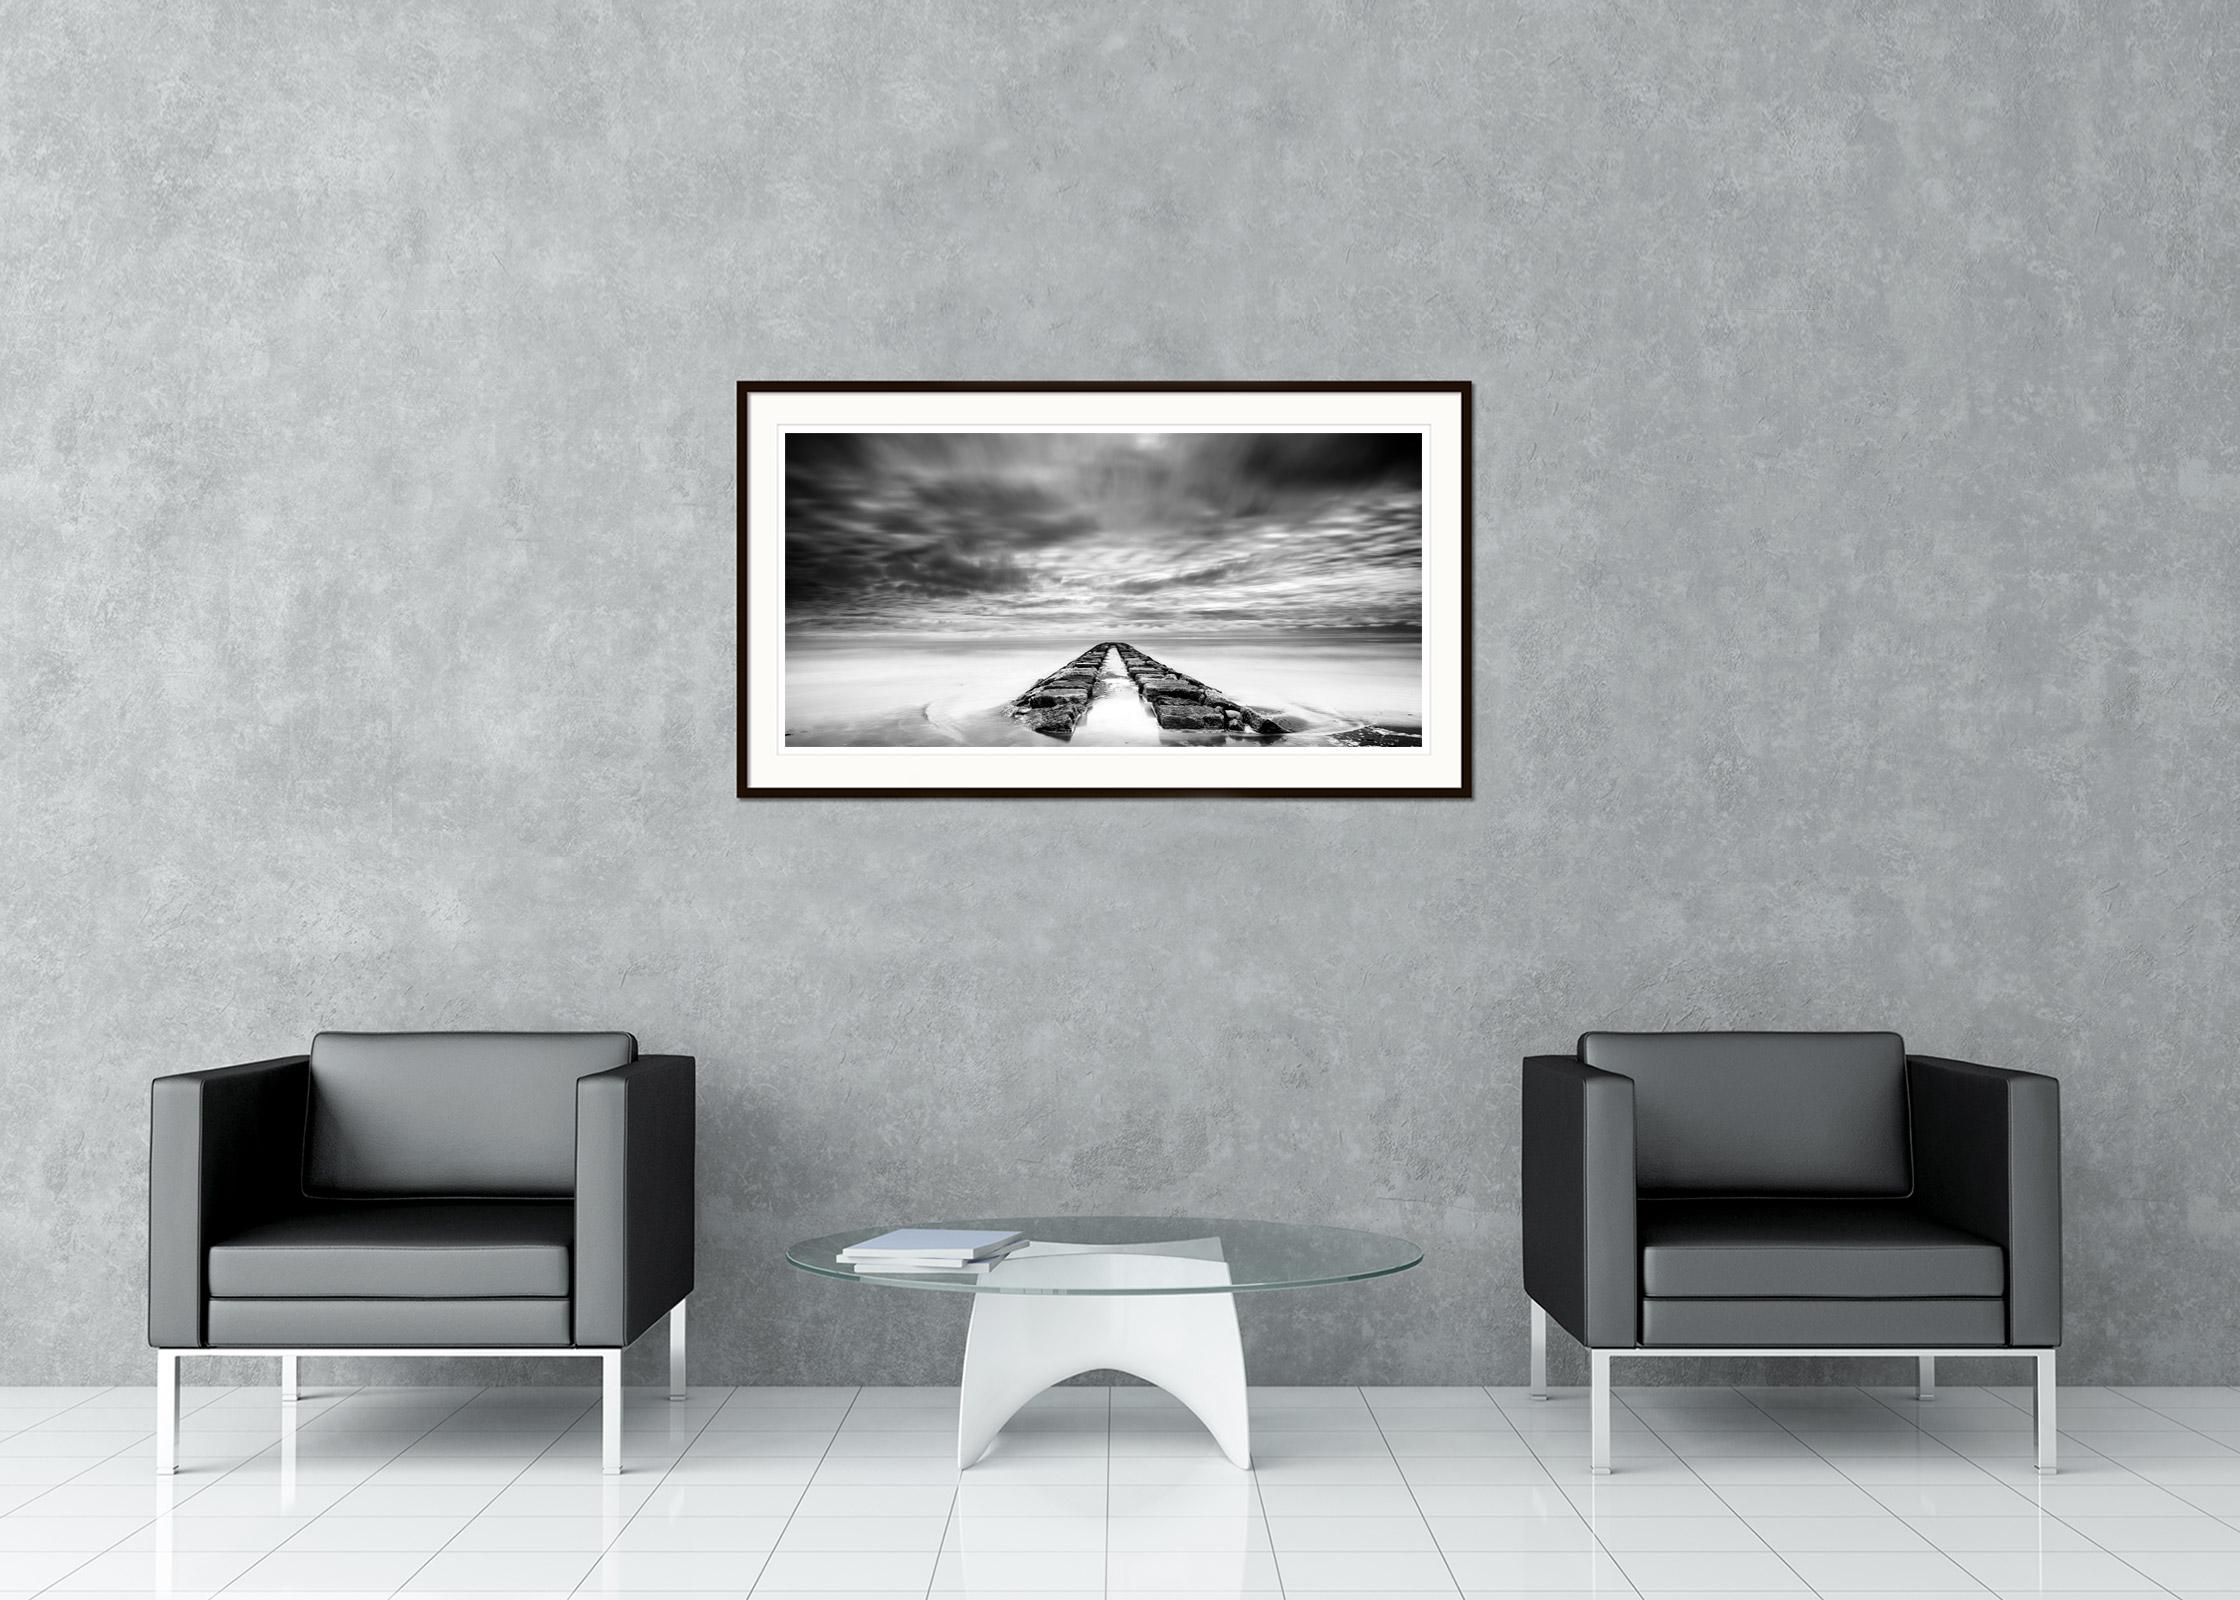 Black and White Fine Art long exposure landscape photography. Rocky Pier in stormy overcast weather on the beach of Italy. Archival pigment ink print, edition of 5. Signed, titled, dated and numbered by artist. Certificate of authenticity included.